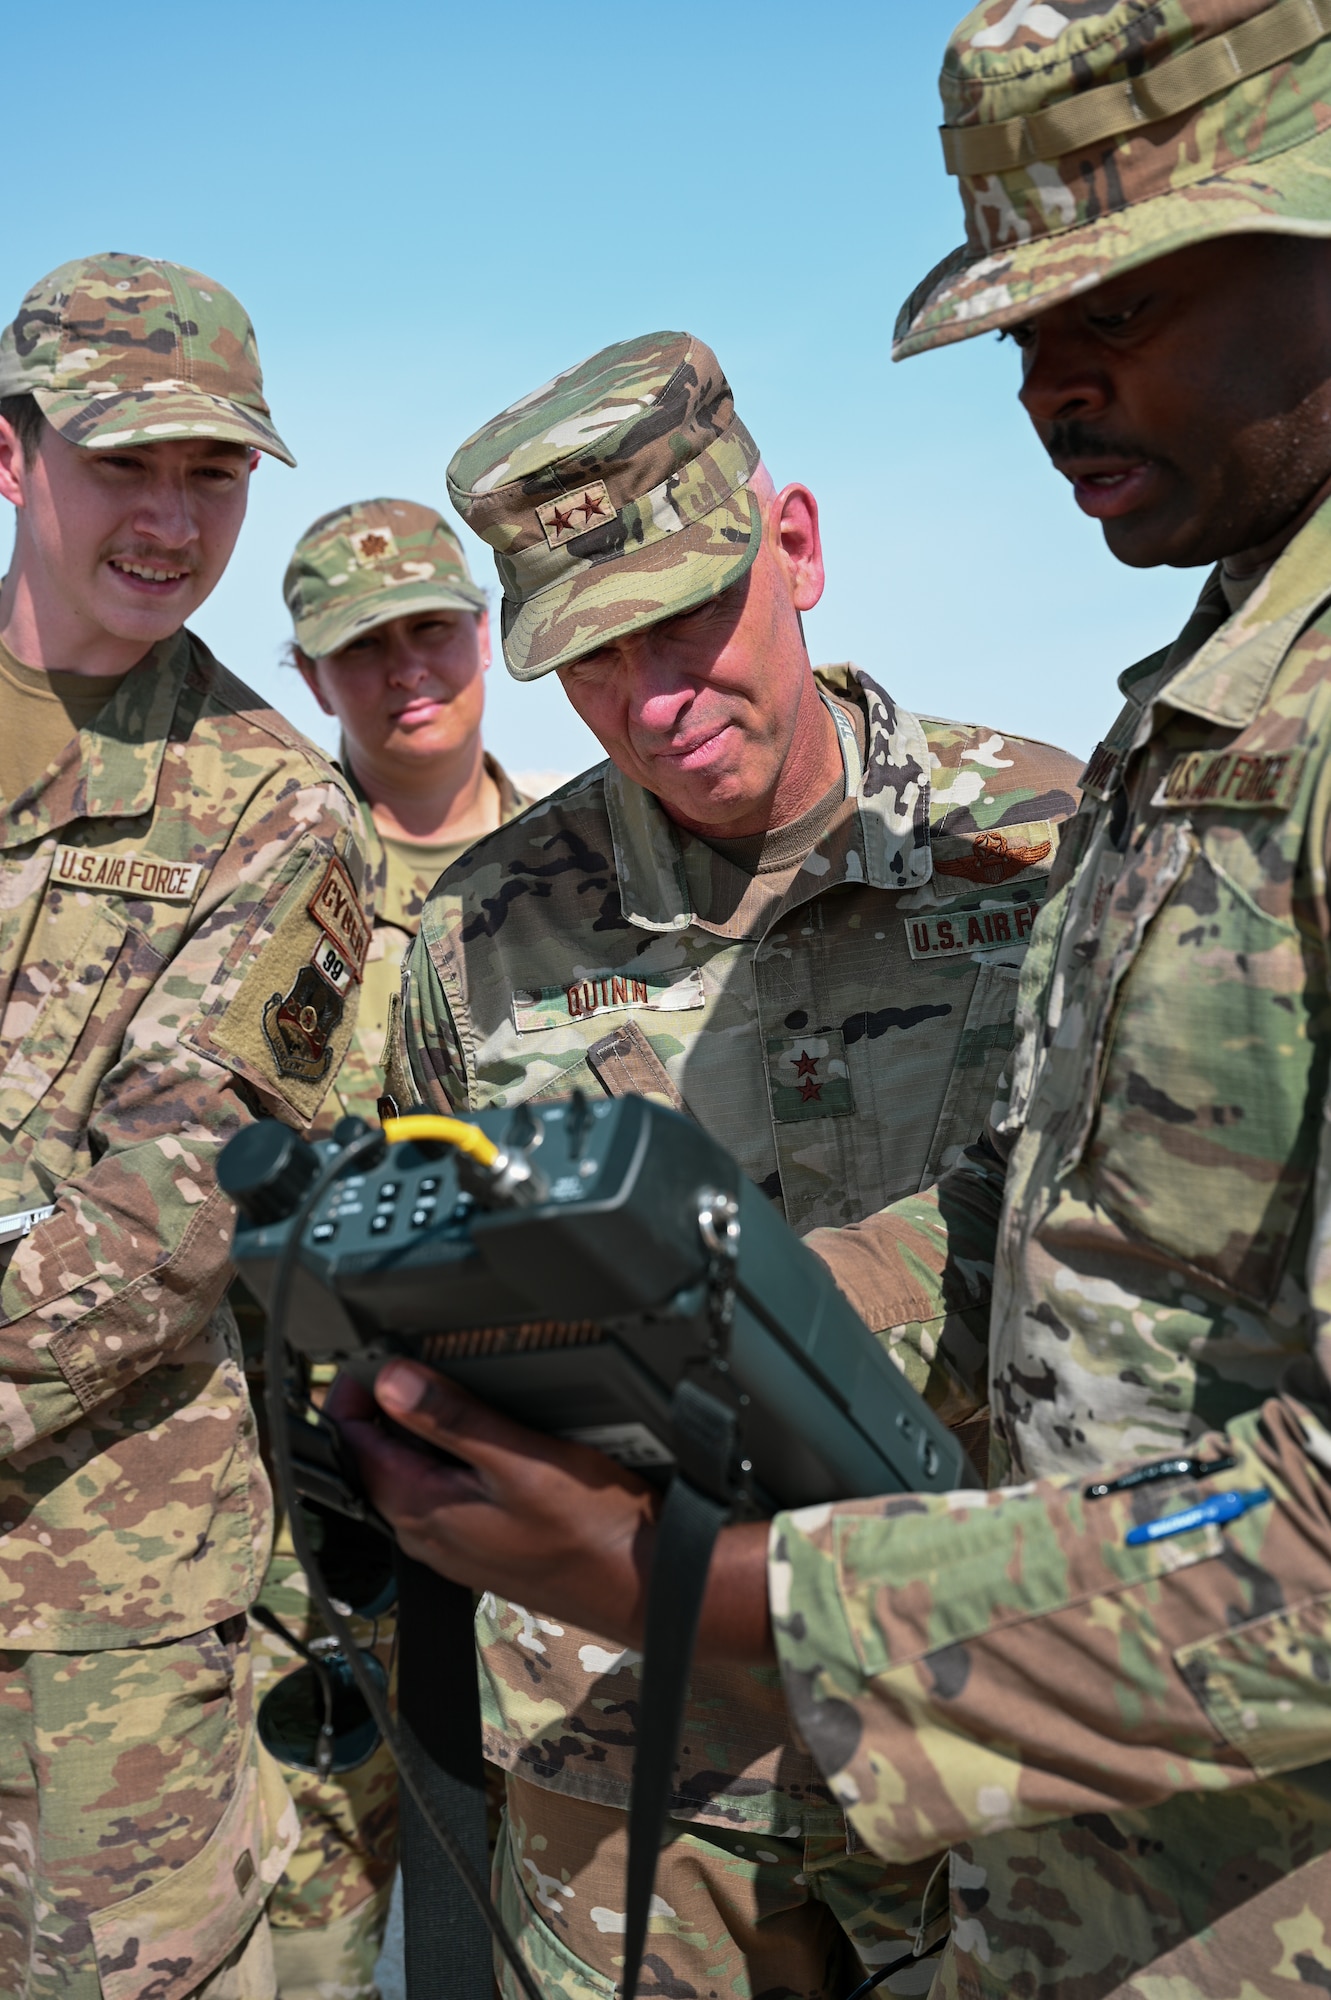 Members of Task Force 99 and Maj. Gen. Clark J. Quinn, Deputy Commander Ninth Air Force (Air Forces Central), observe a spectrum analyzer during new technology demonstration at Al Udeid Air Base, Qatar, November 18, 2022. TF99 was created to find innovative ways disrupt, degrade, and frustrate adversary systems and processes.(U.S. Air Force photo by Senior Airman Micah Coate)